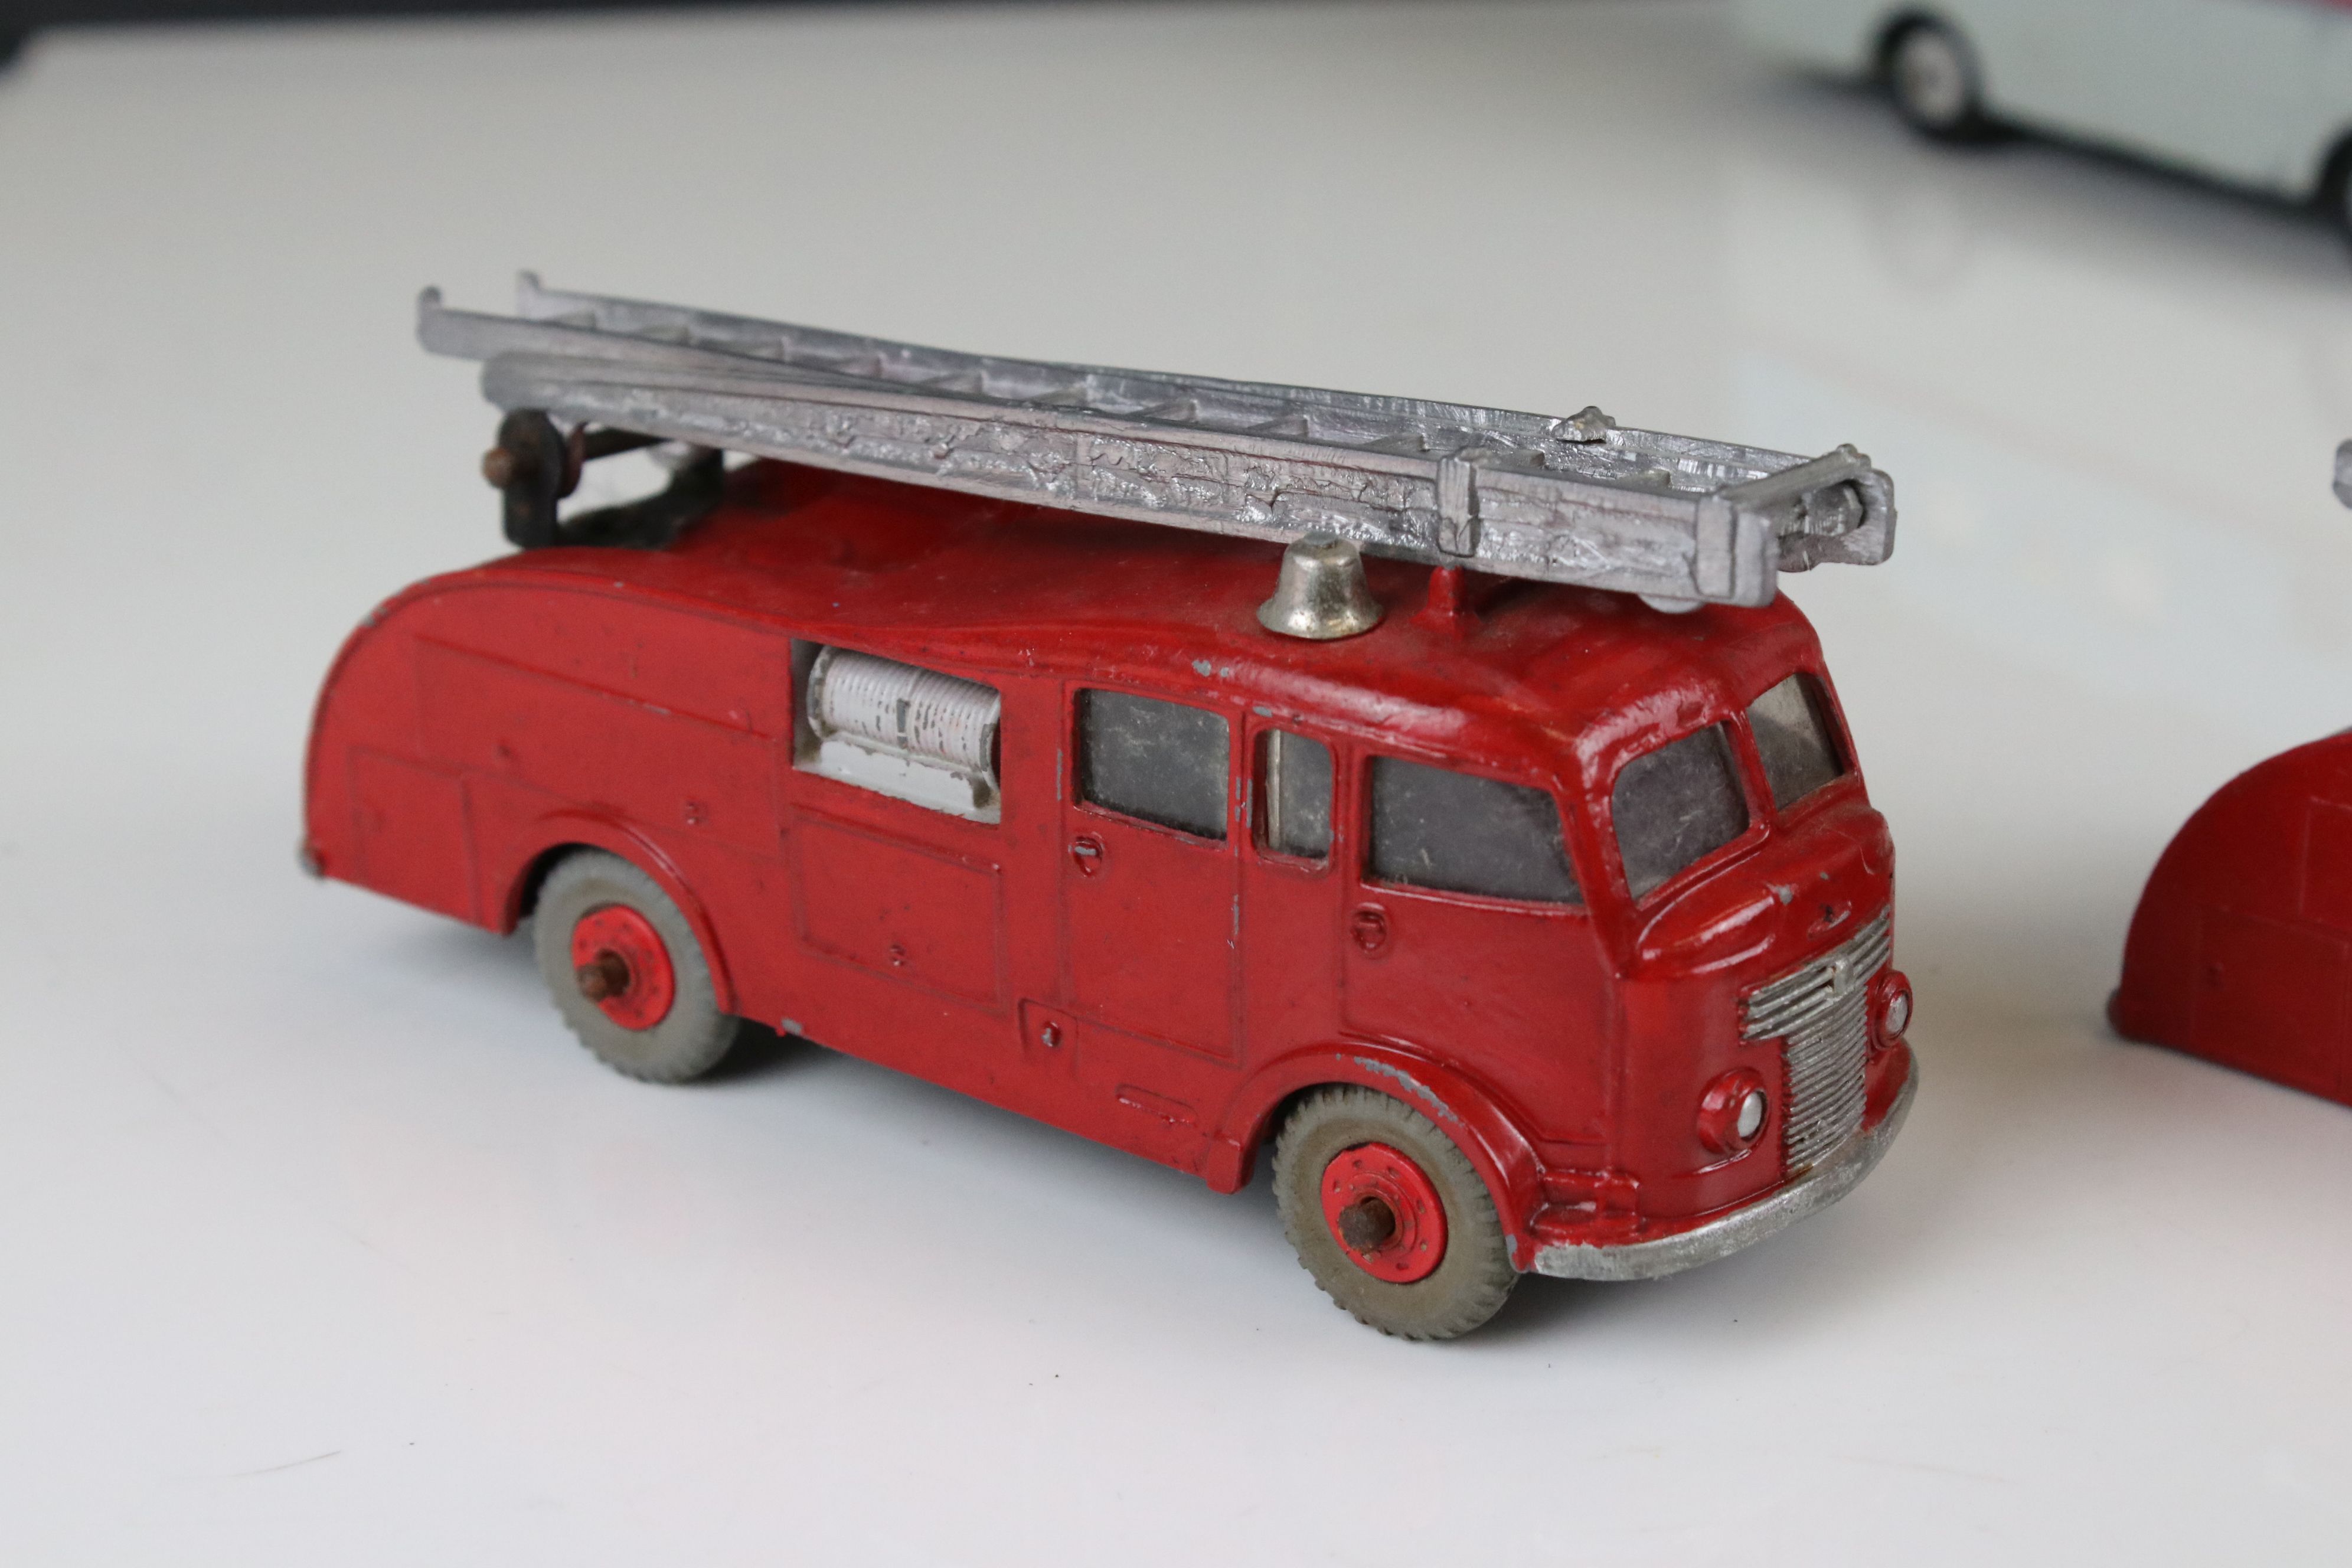 15 play worn mid 20th diecast models to include TV Mobile Control Room, 967 BBC TV Mobile Control - Image 11 of 15